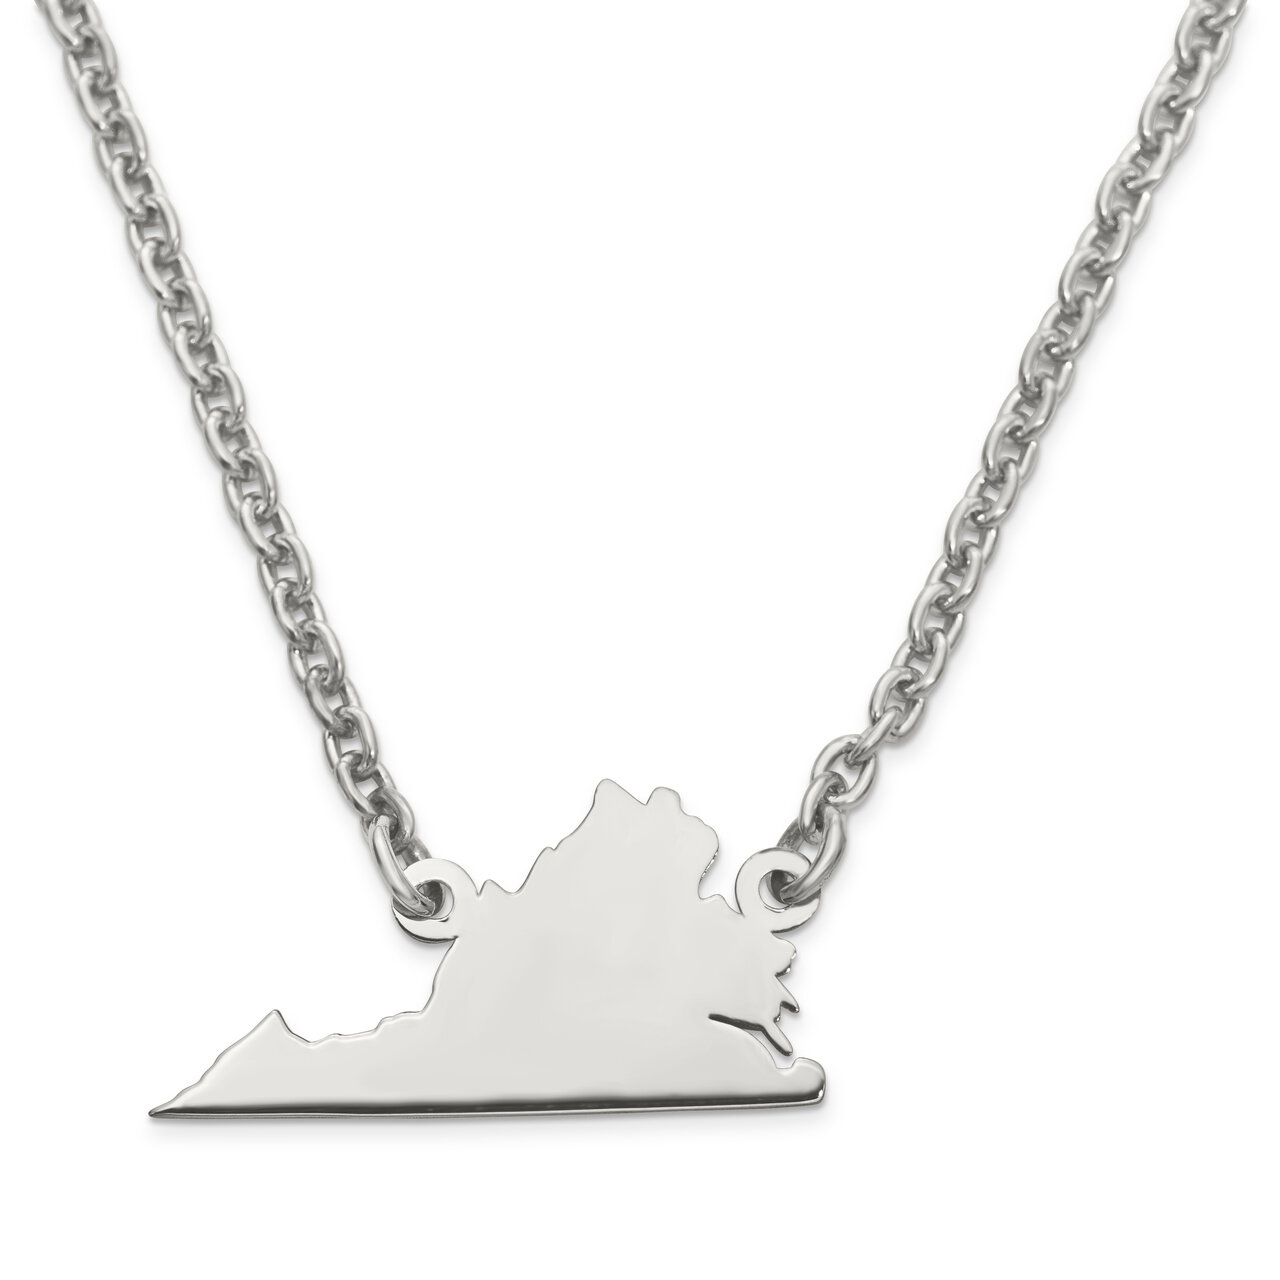 Virginia State Pendant Necklace with Chain Sterling Silver Engravable XNA706SS-VA